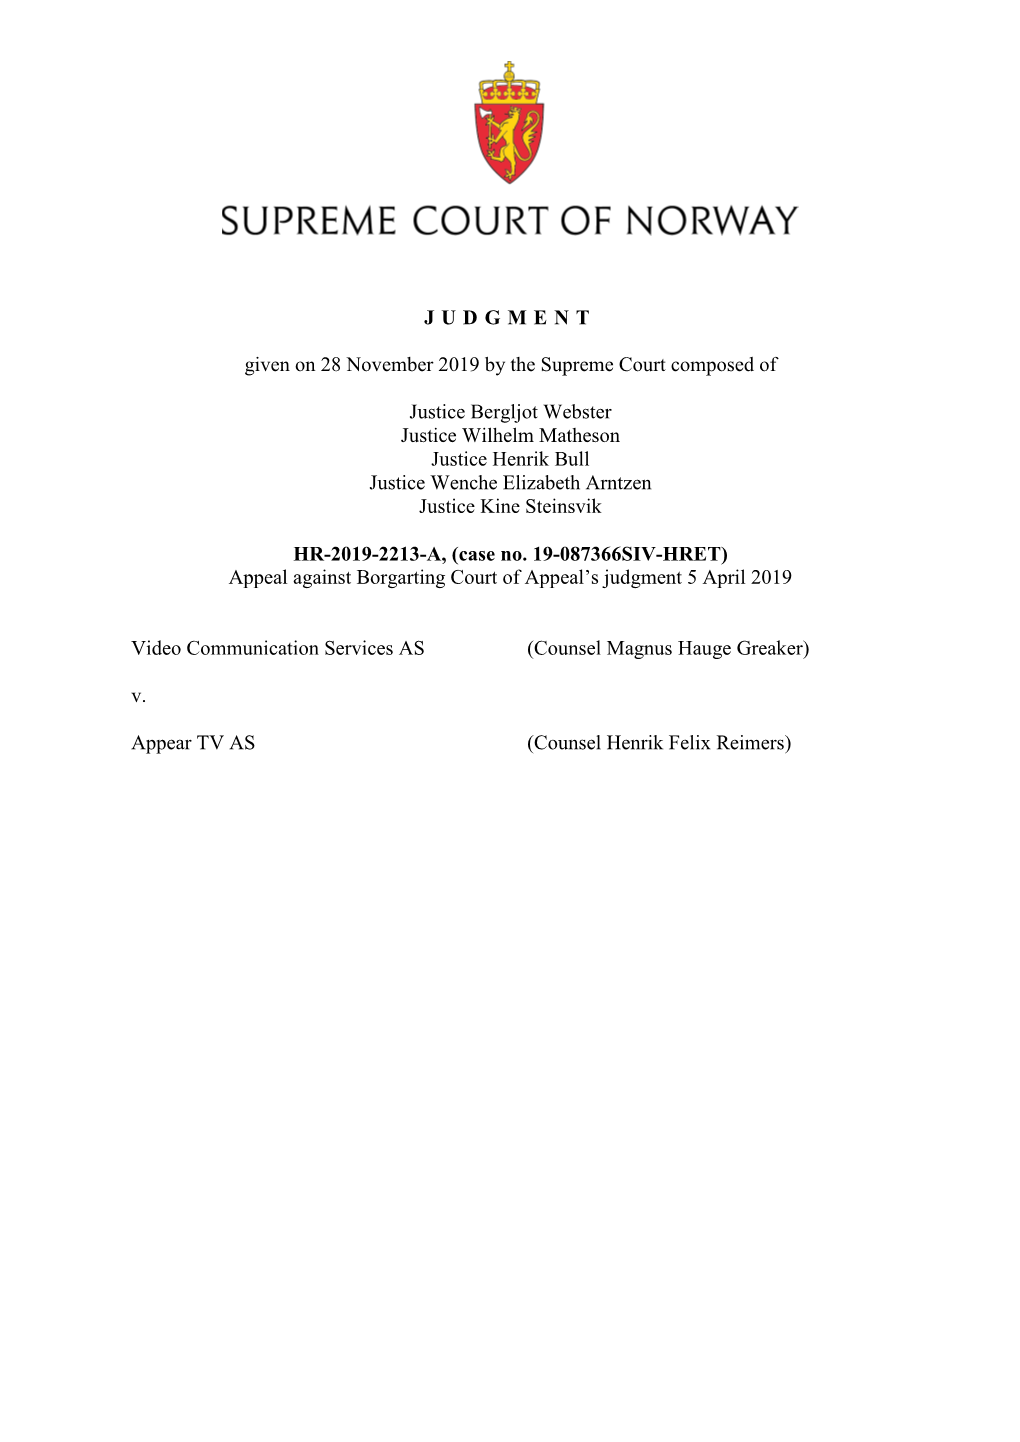 JUDGMENT Given on 28 November 2019 by the Supreme Court